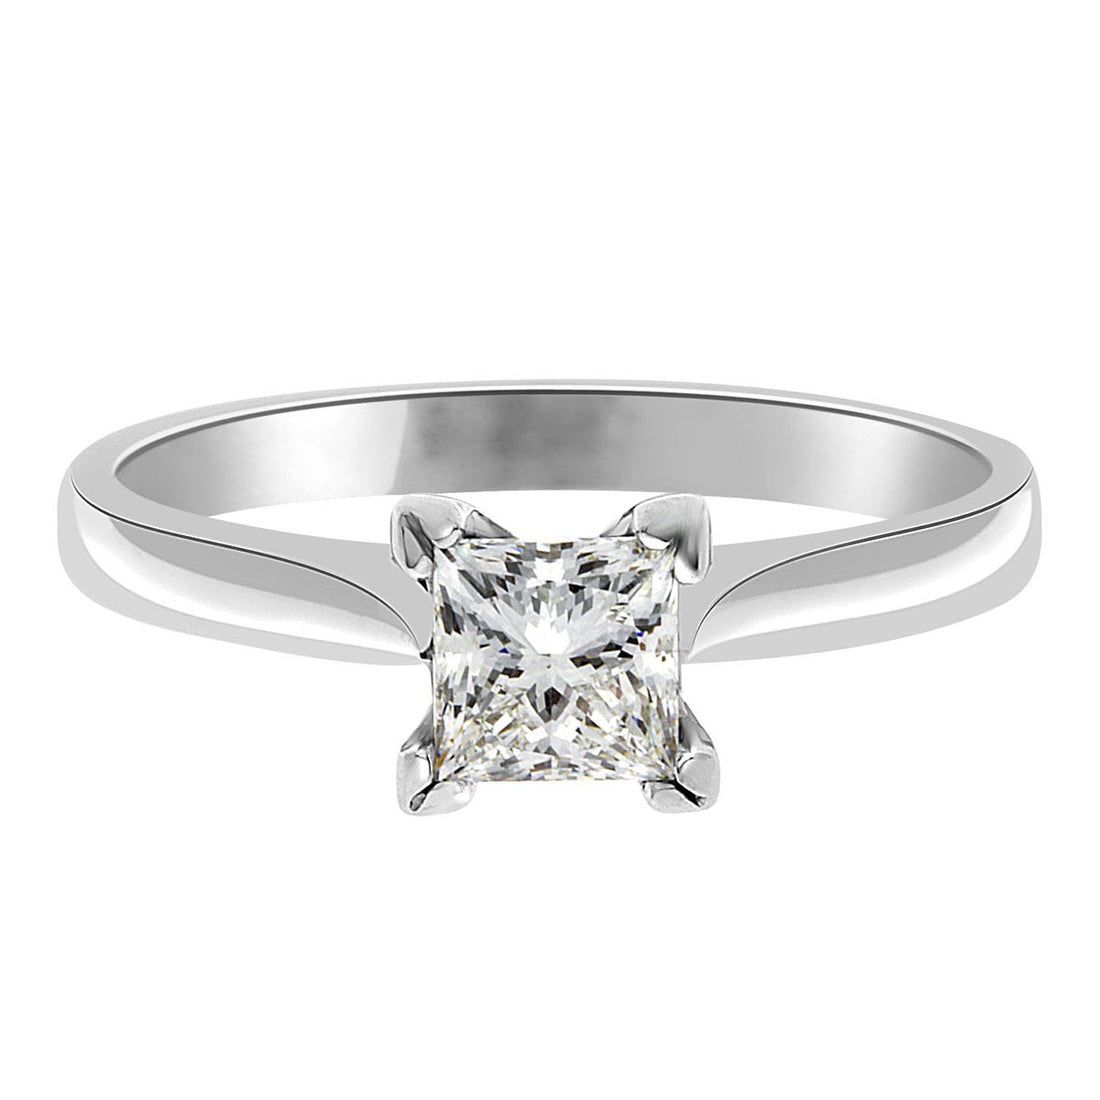 Princess Cut Solitaire  engagement ring in white gold